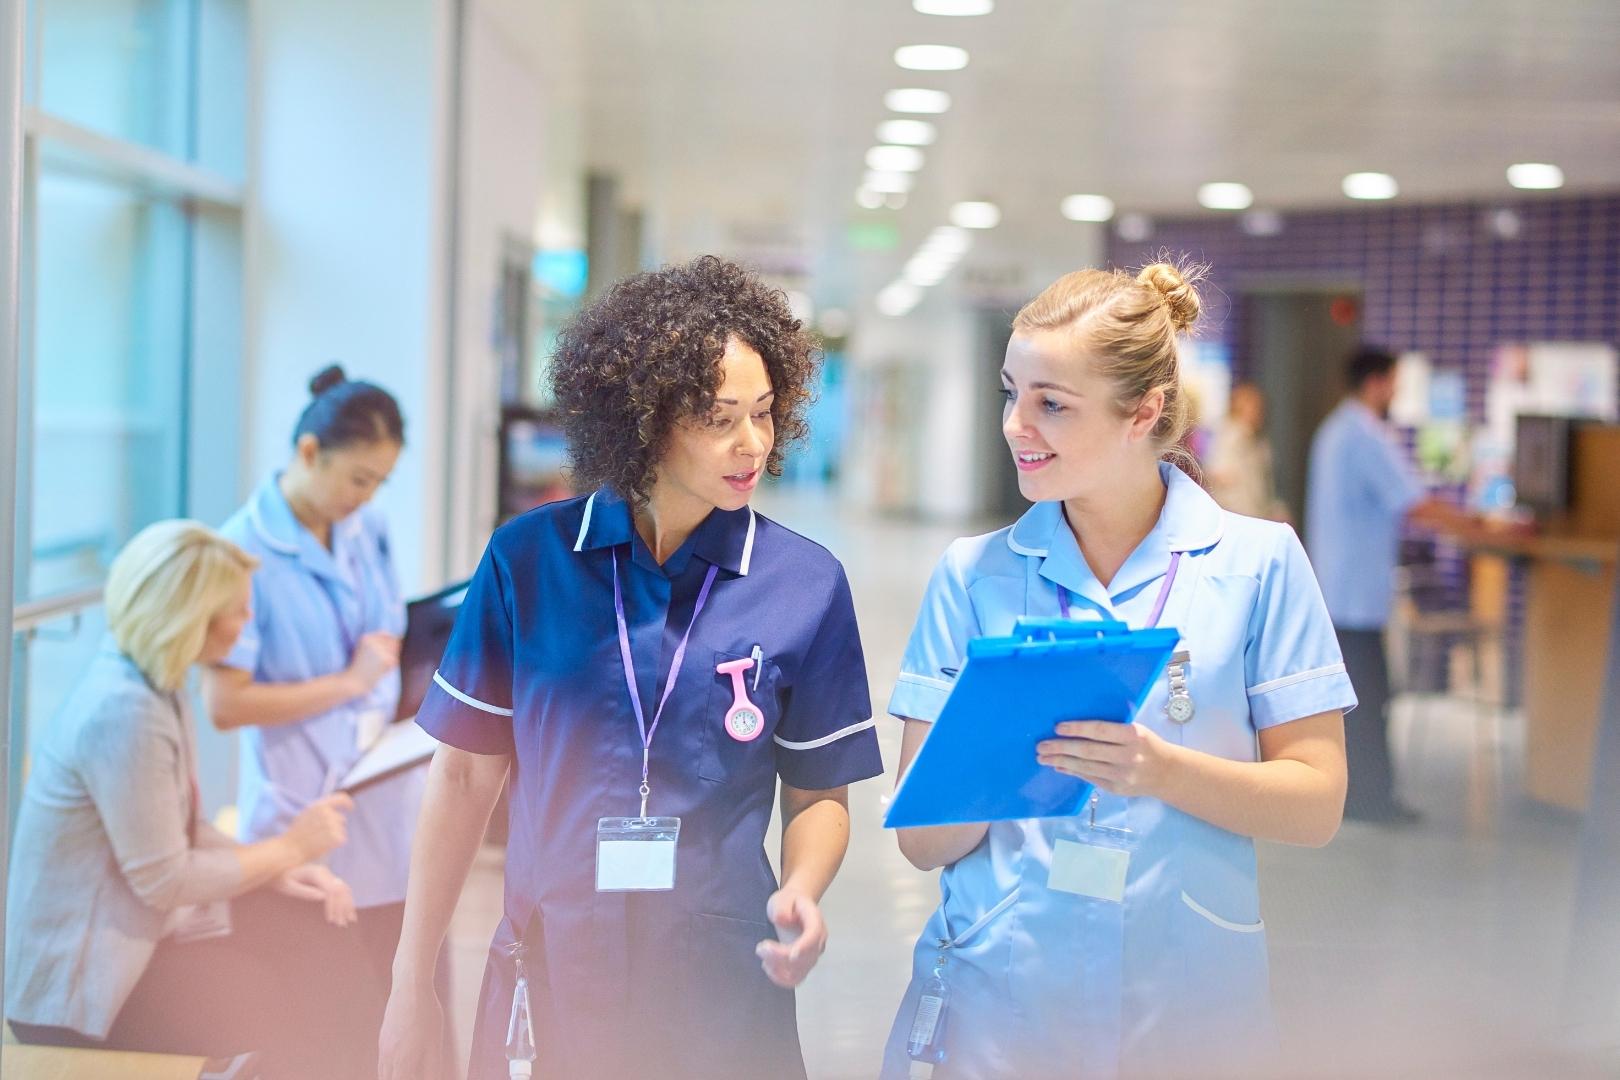 What Are The Responsibilities of a Coronary Care Unit Nurse?